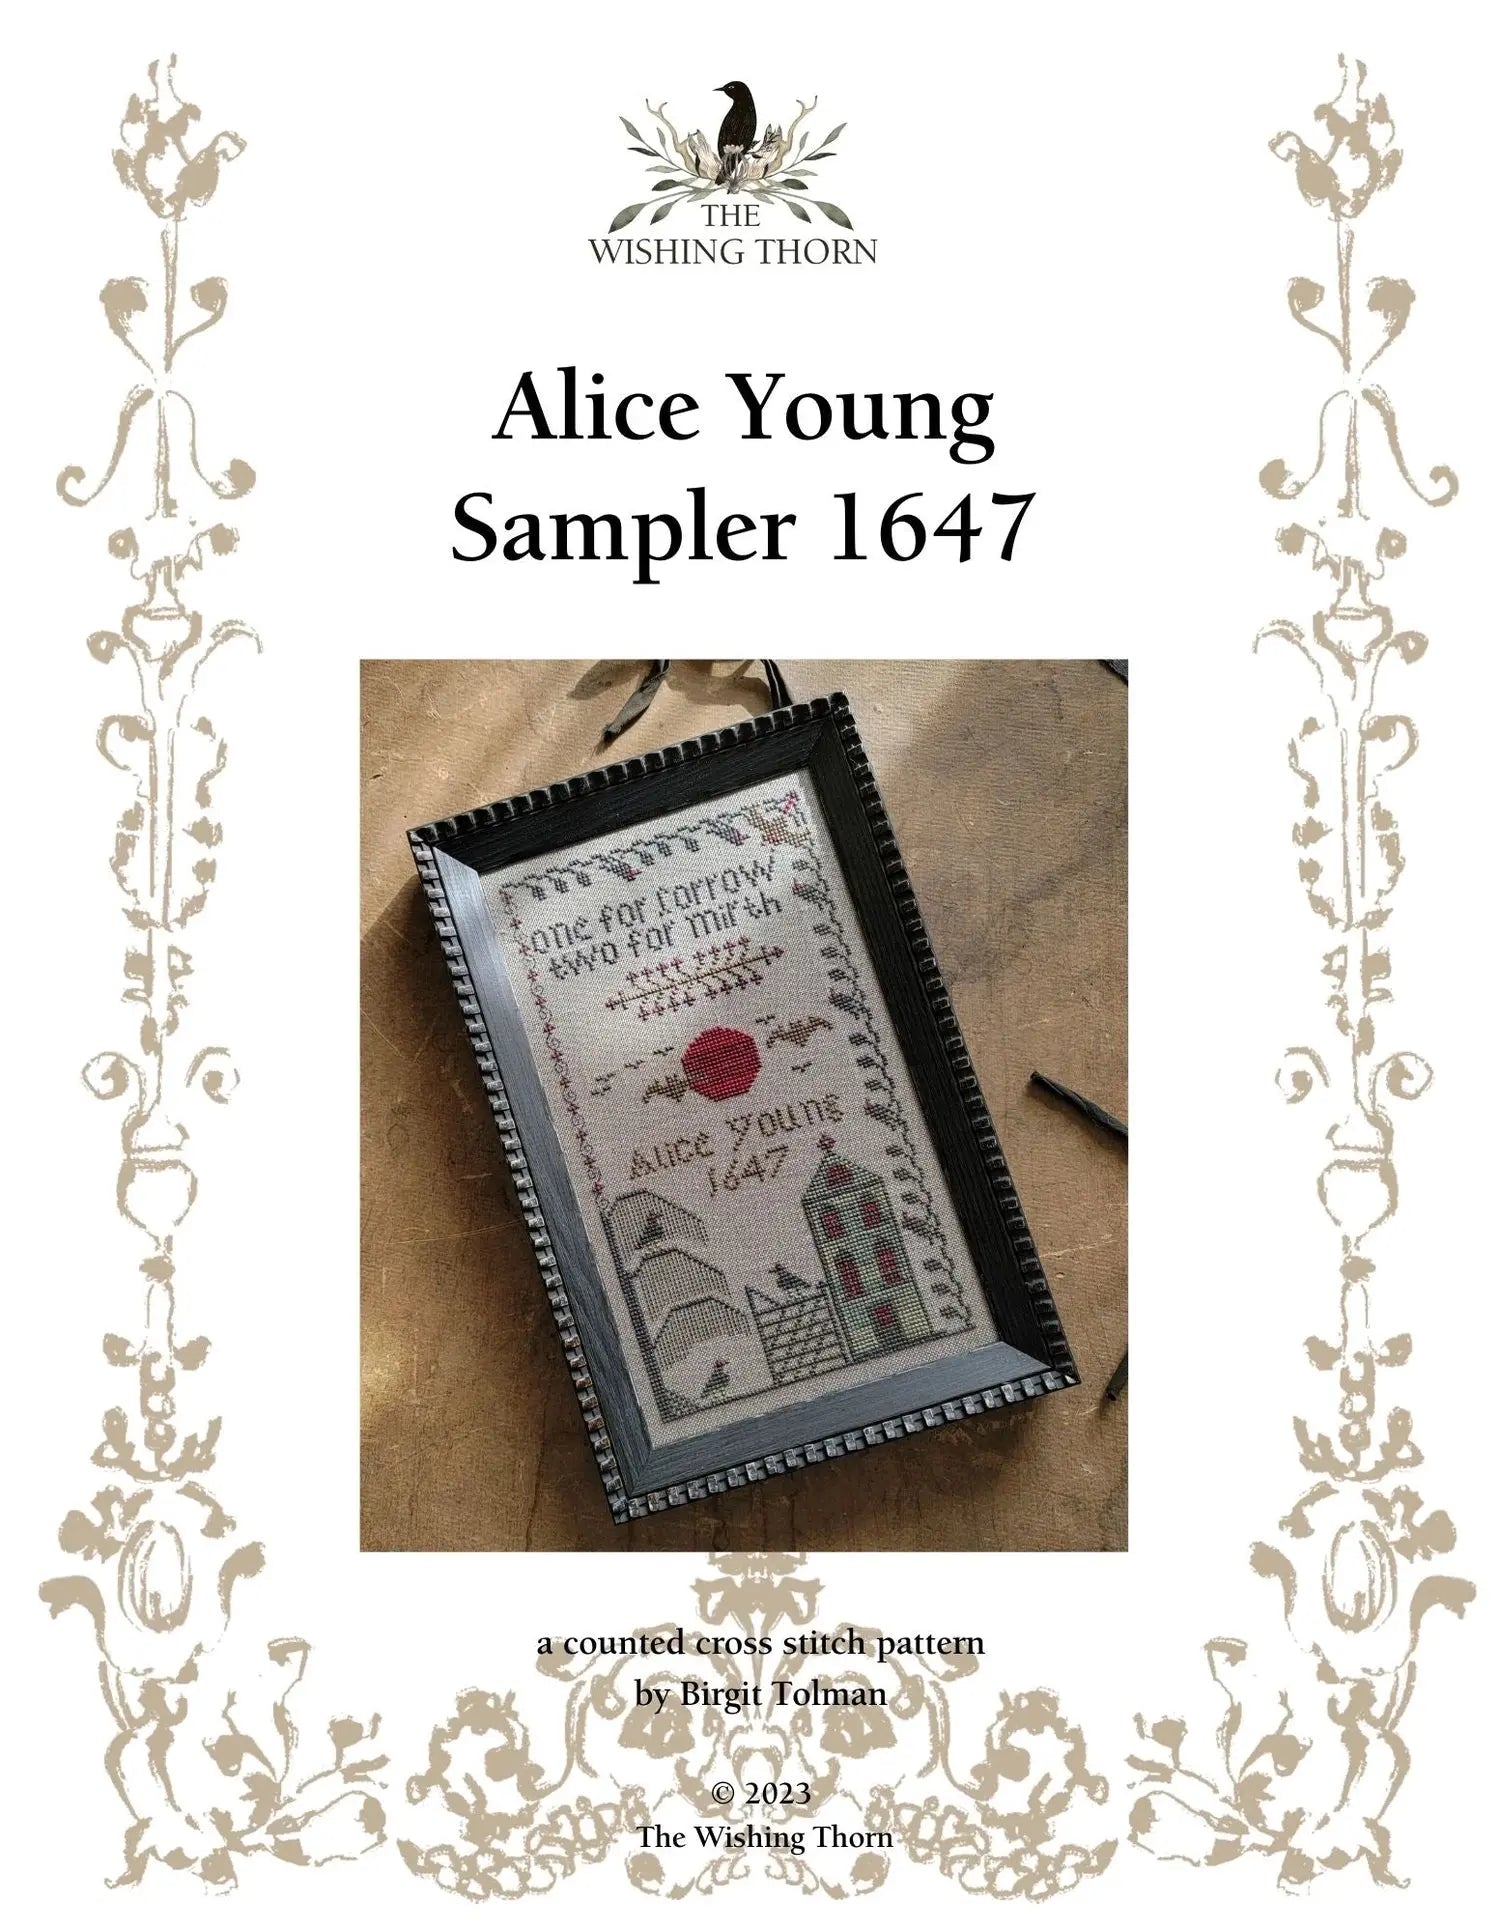 Alice Young Sampler 1647 by The Wishing Thorn The Wishing Thorn